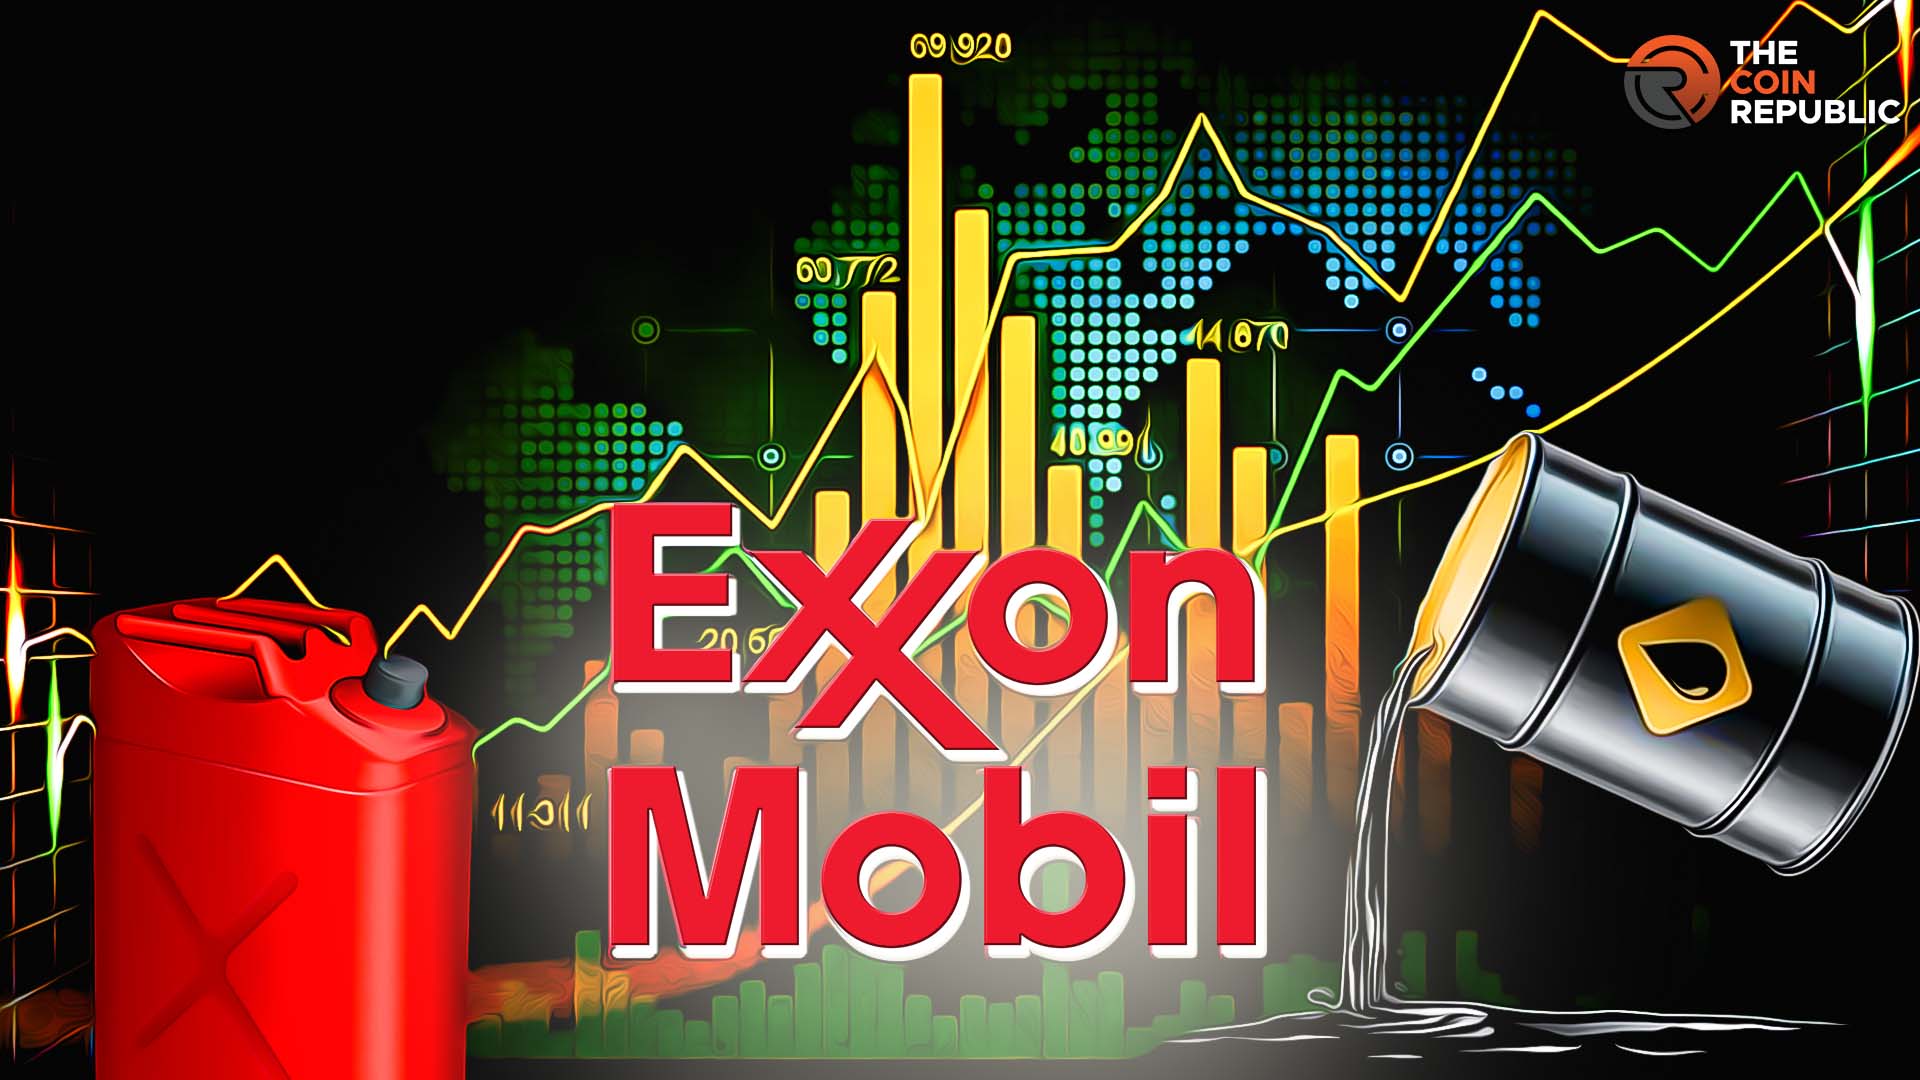 Exxon Stock Keeps Falling Without Any Signs of Recovery